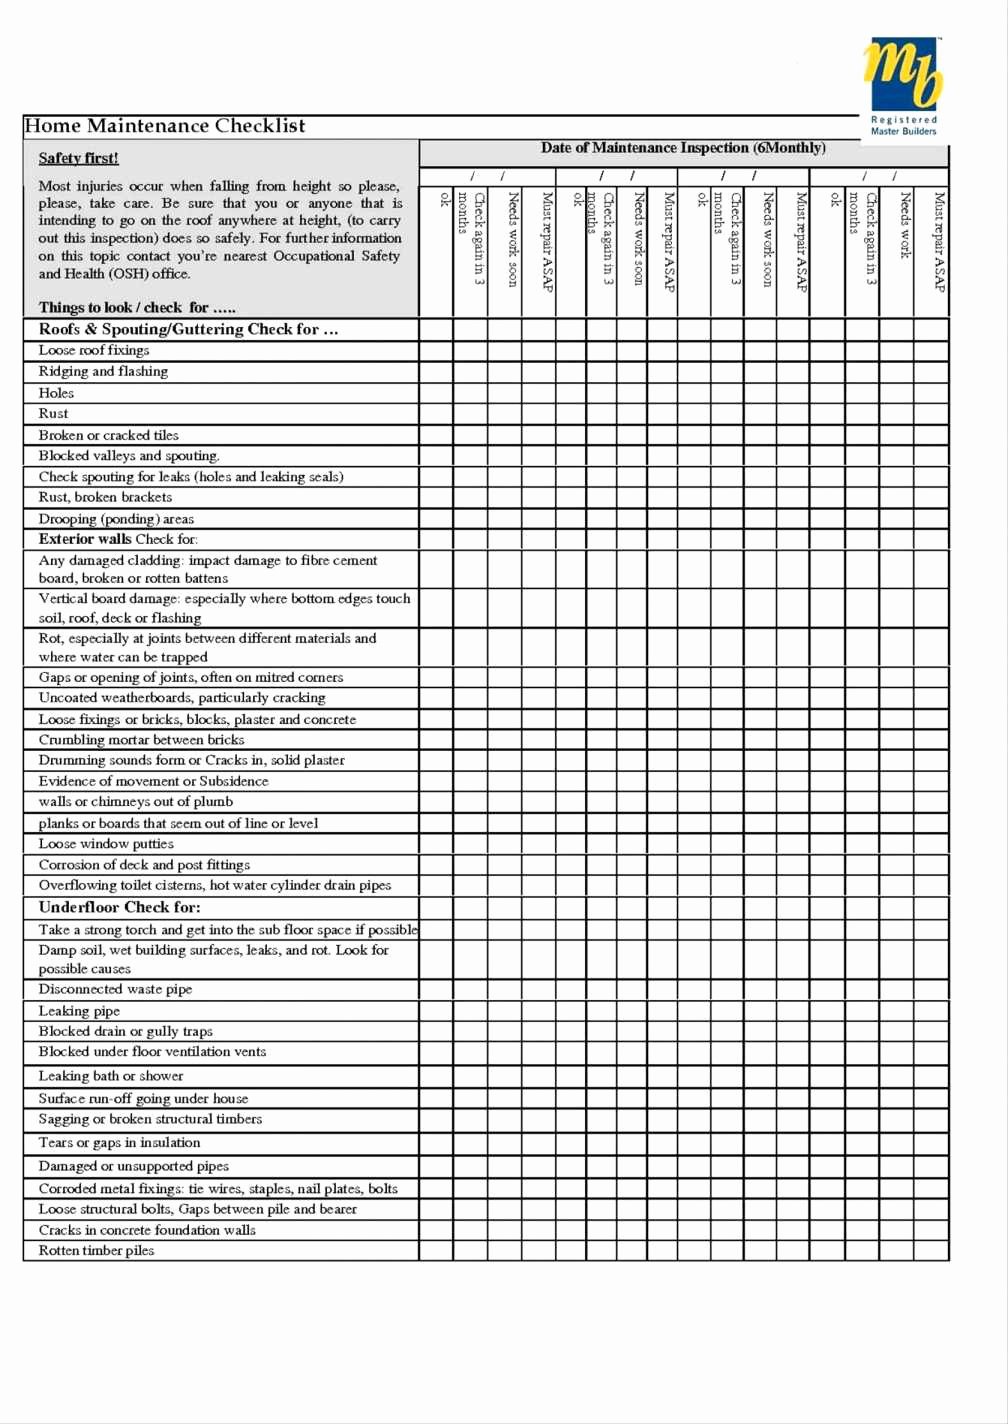 Preventive Maintenance Excel Template Awesome Preventive Maintenance Spreadsheet Spreadsheet softwar